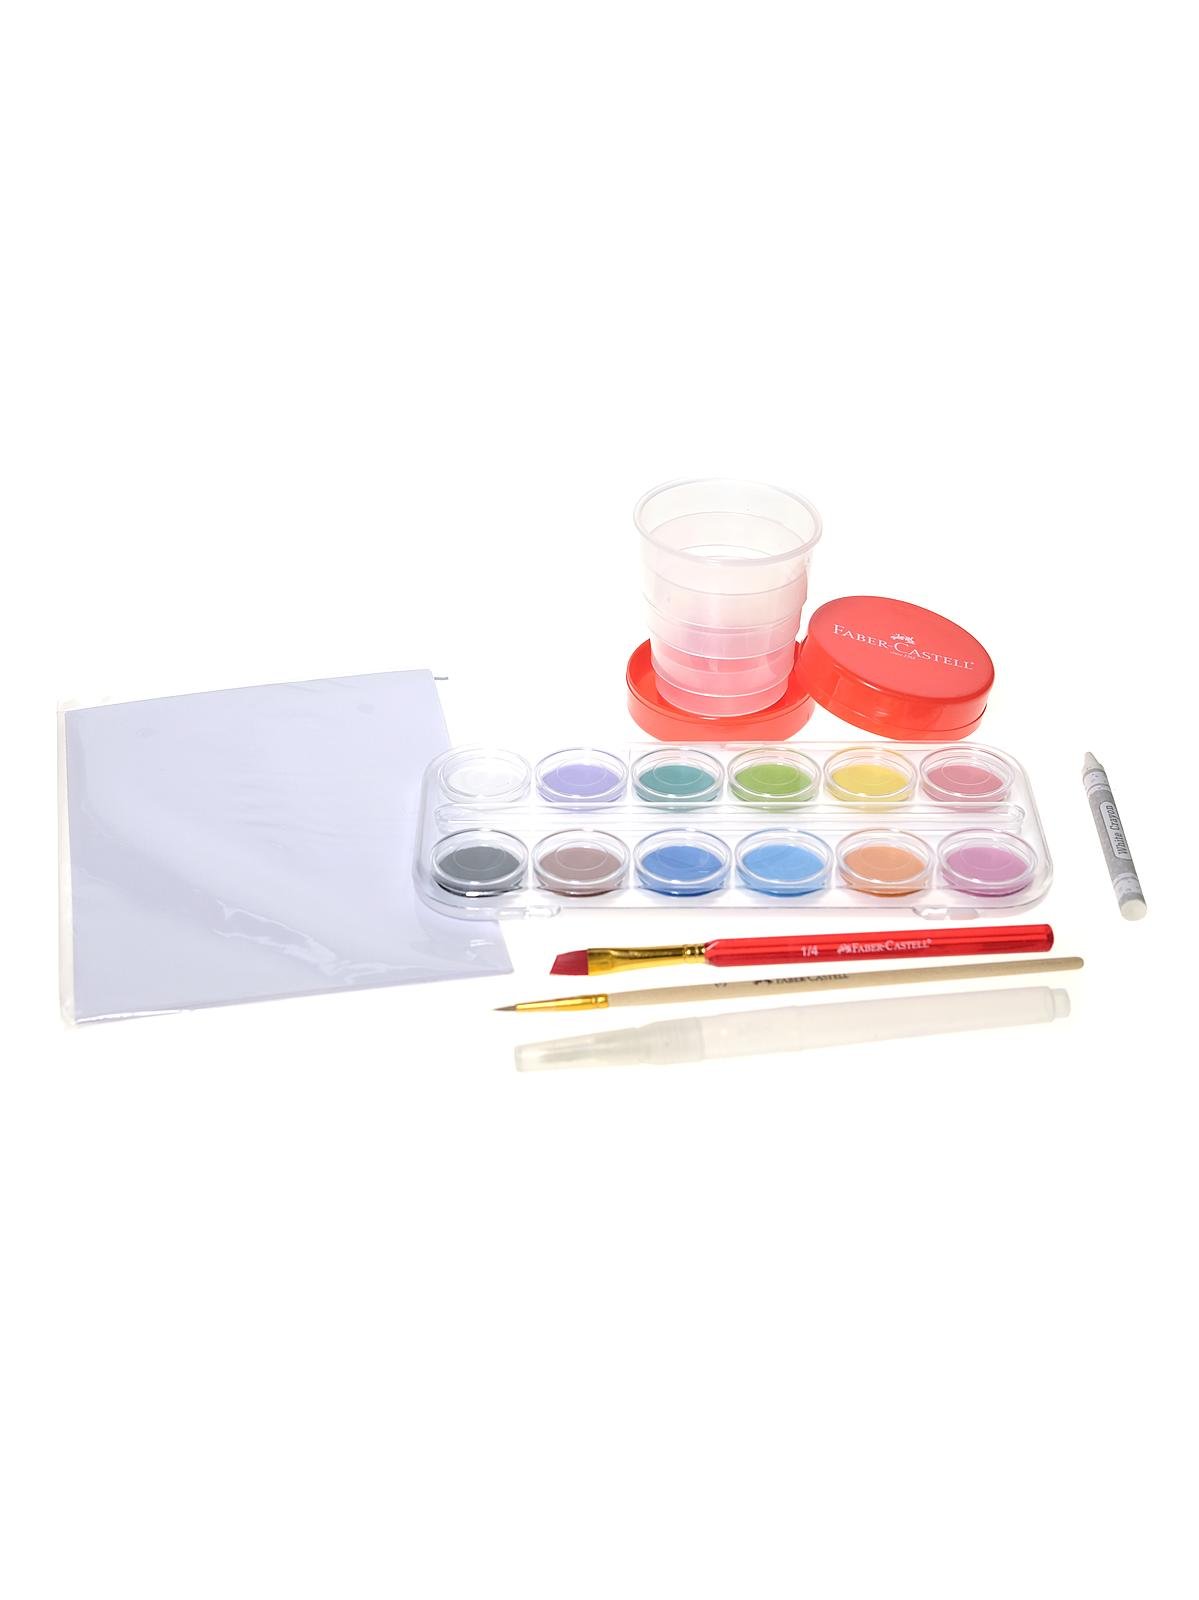 Faber Castell Young Artist Learn to Watercolor Set